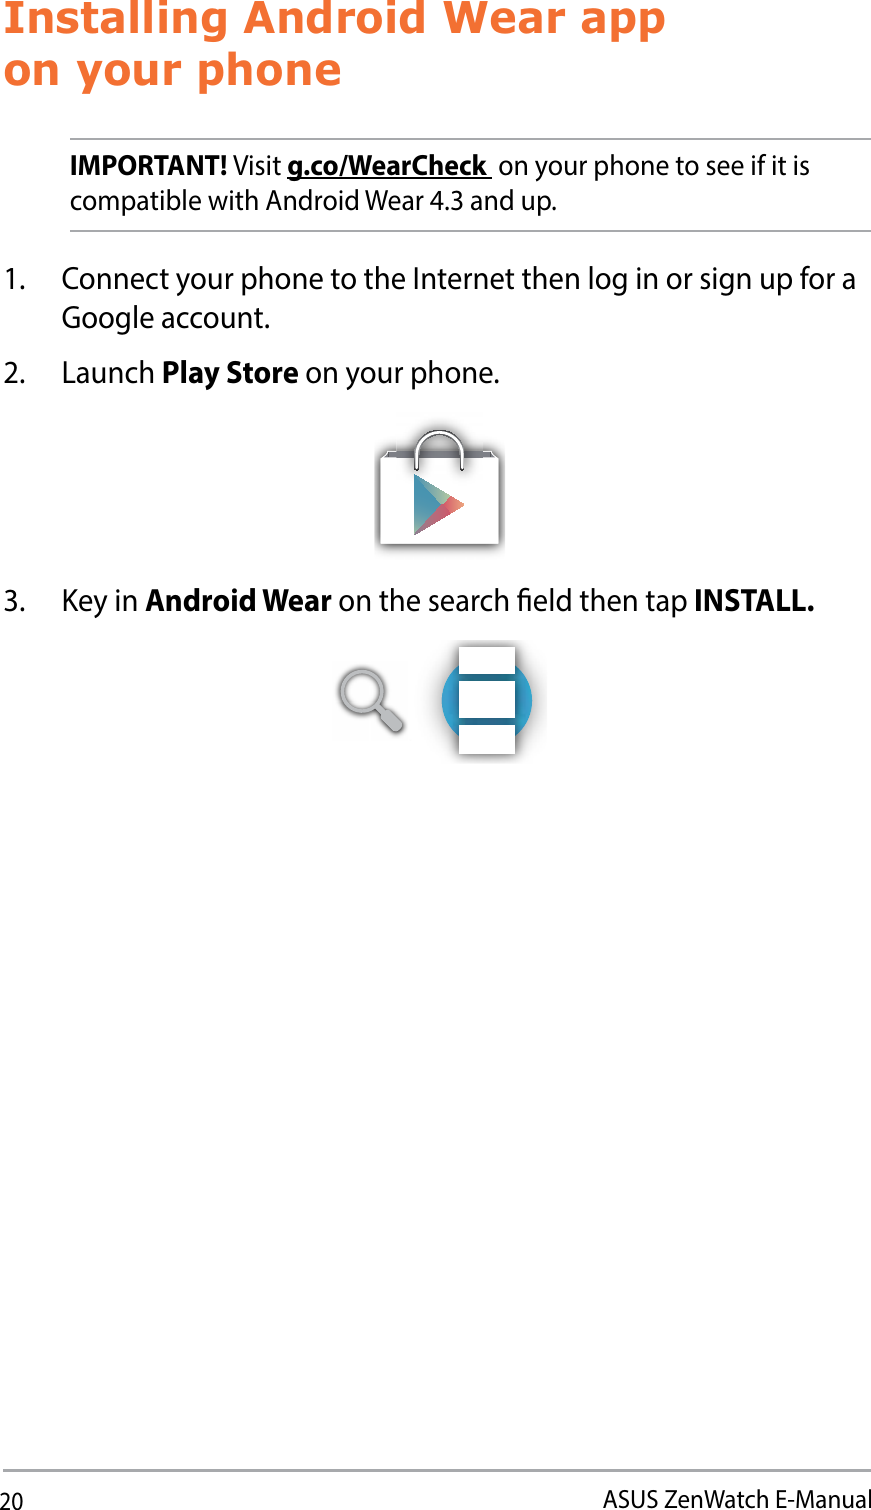 20ASUS ZenWatch E-ManualInstalling Android Wear app  on your phoneIMPORTANT! Visit g.co/WearCheck  on your phone to see if it is compatible with Android Wear 4.3 and up. 1.  Connect your phone to the Internet then log in or sign up for a Google account.2. Launch Play Store on your phone.3. Key in Android Wear on the search eld then tap INSTALL.